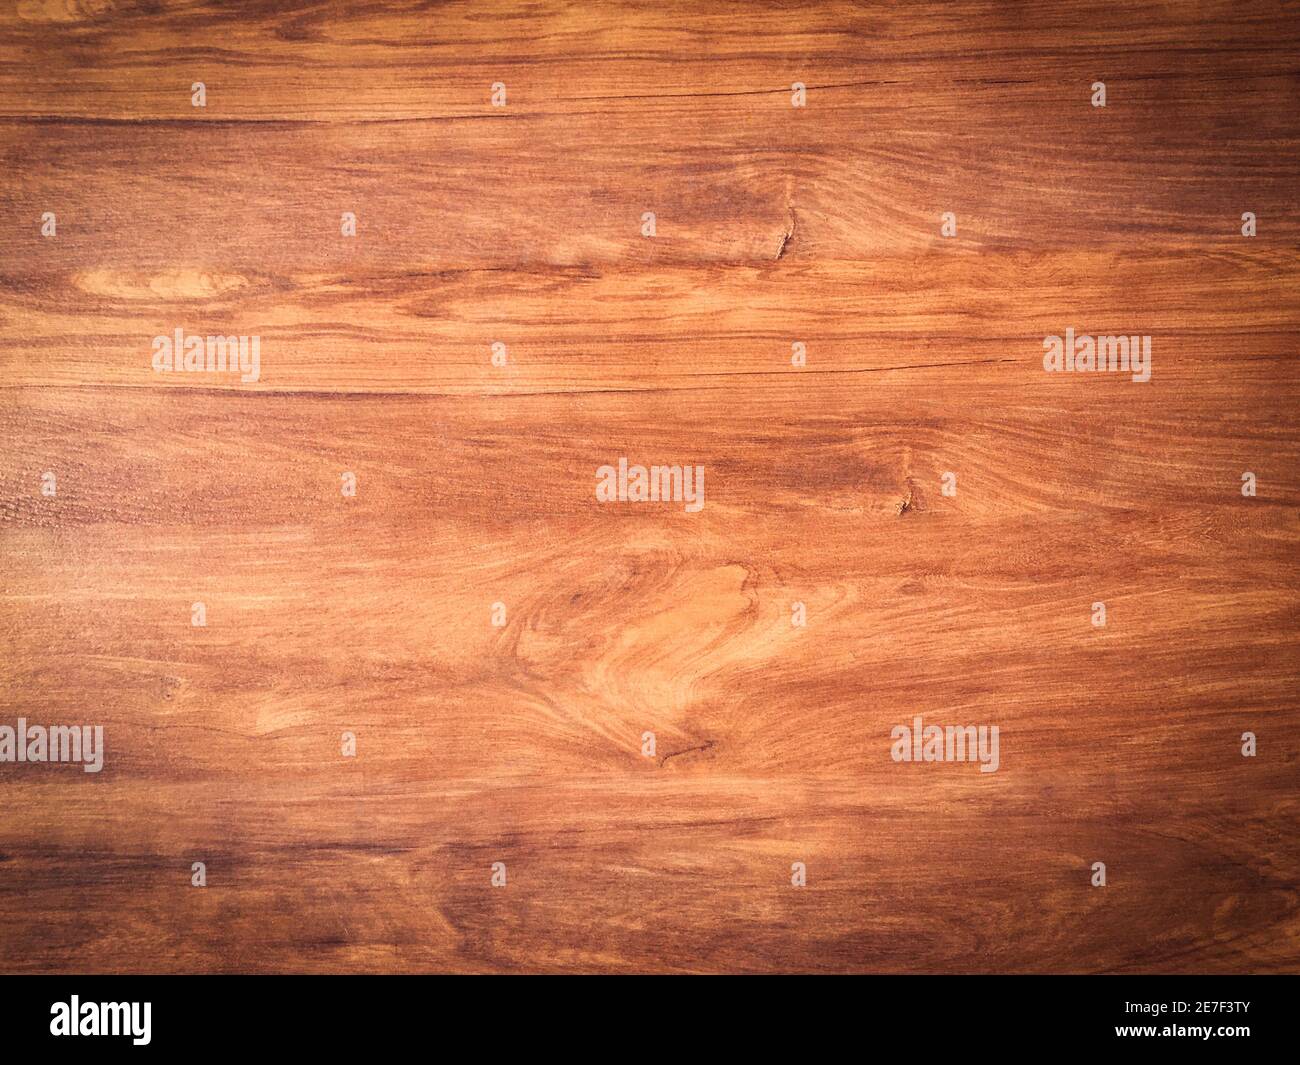 Smooth wood texture use as natural background with copy space for design or work Stock Photo